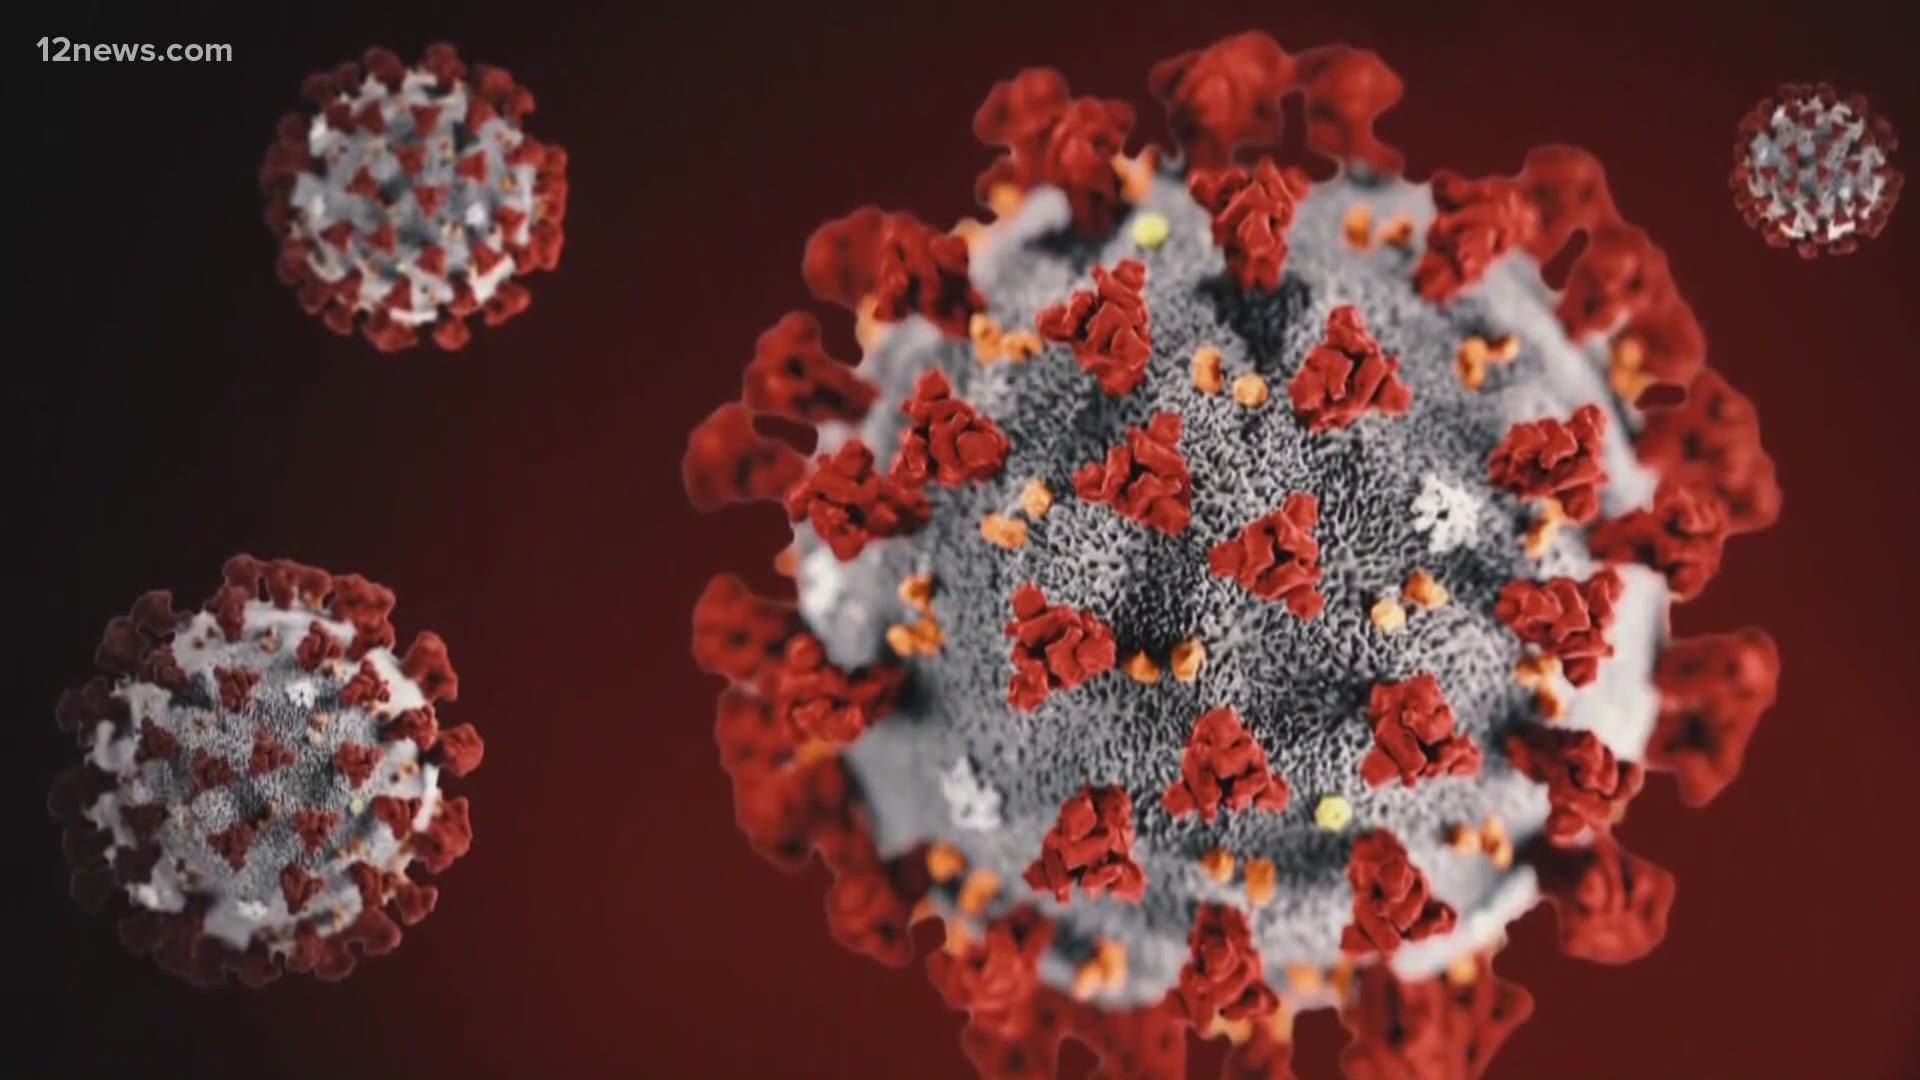 Arizona has surpassed 100,000 cases of coronavirus, but what does that mean? We breakdown what the numbers mean for you and the state.